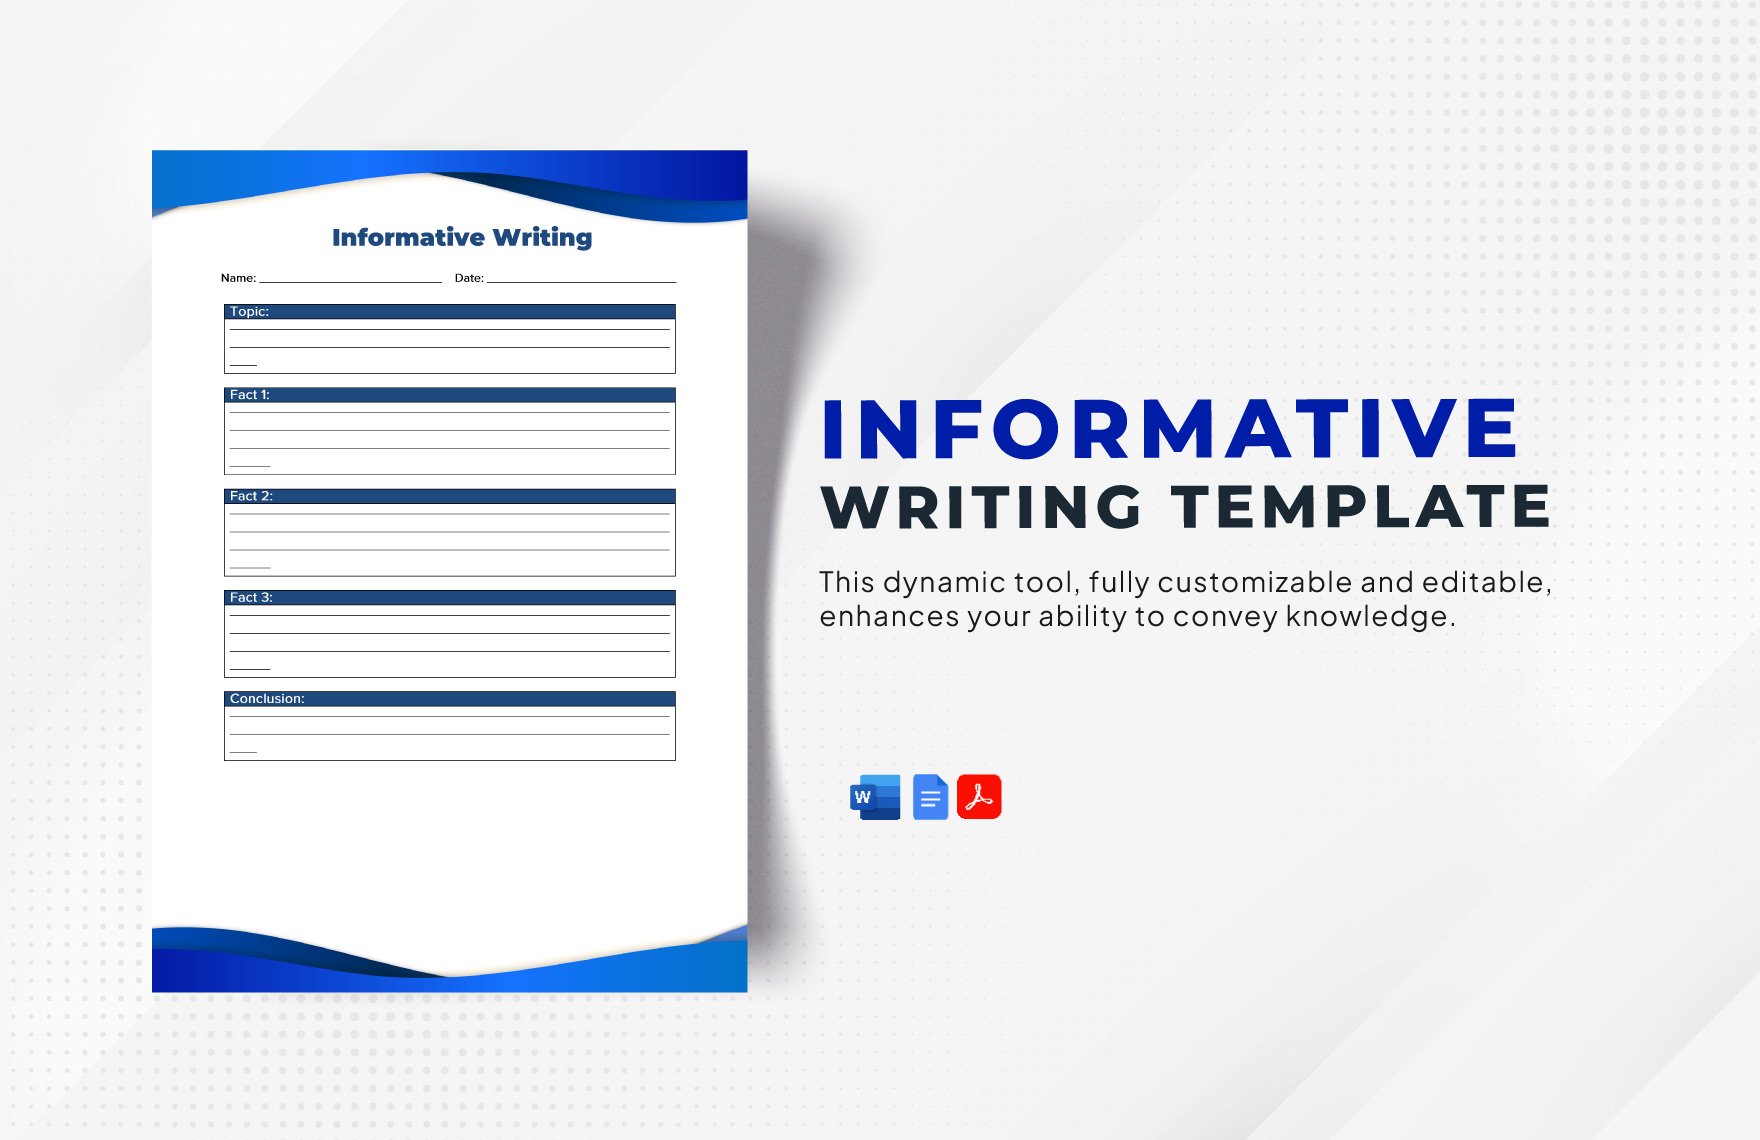 Informative Writing Template